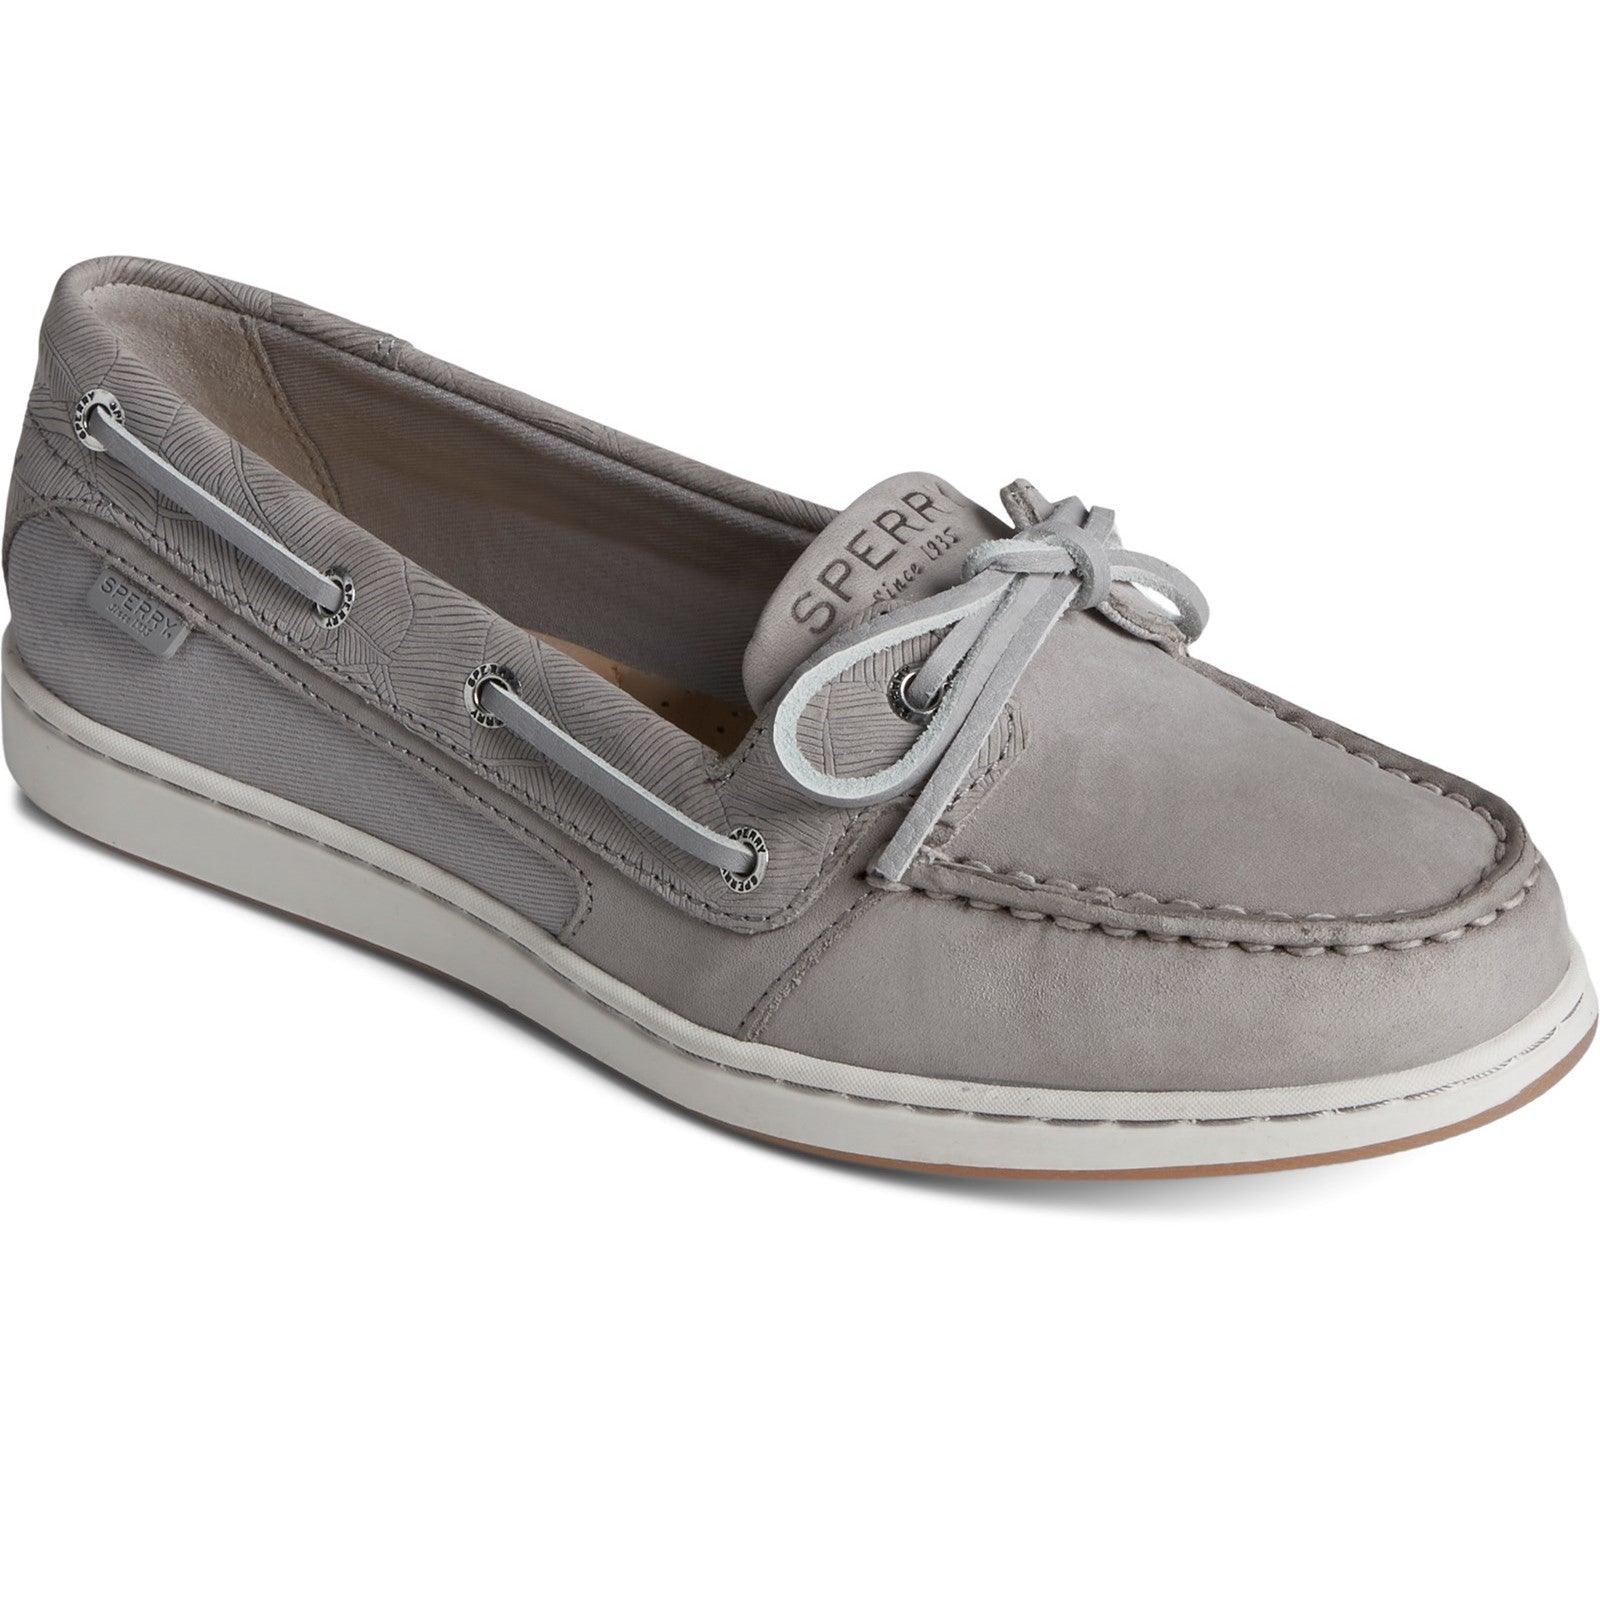 Sperry Top-sider Starfish Emboss Shoes